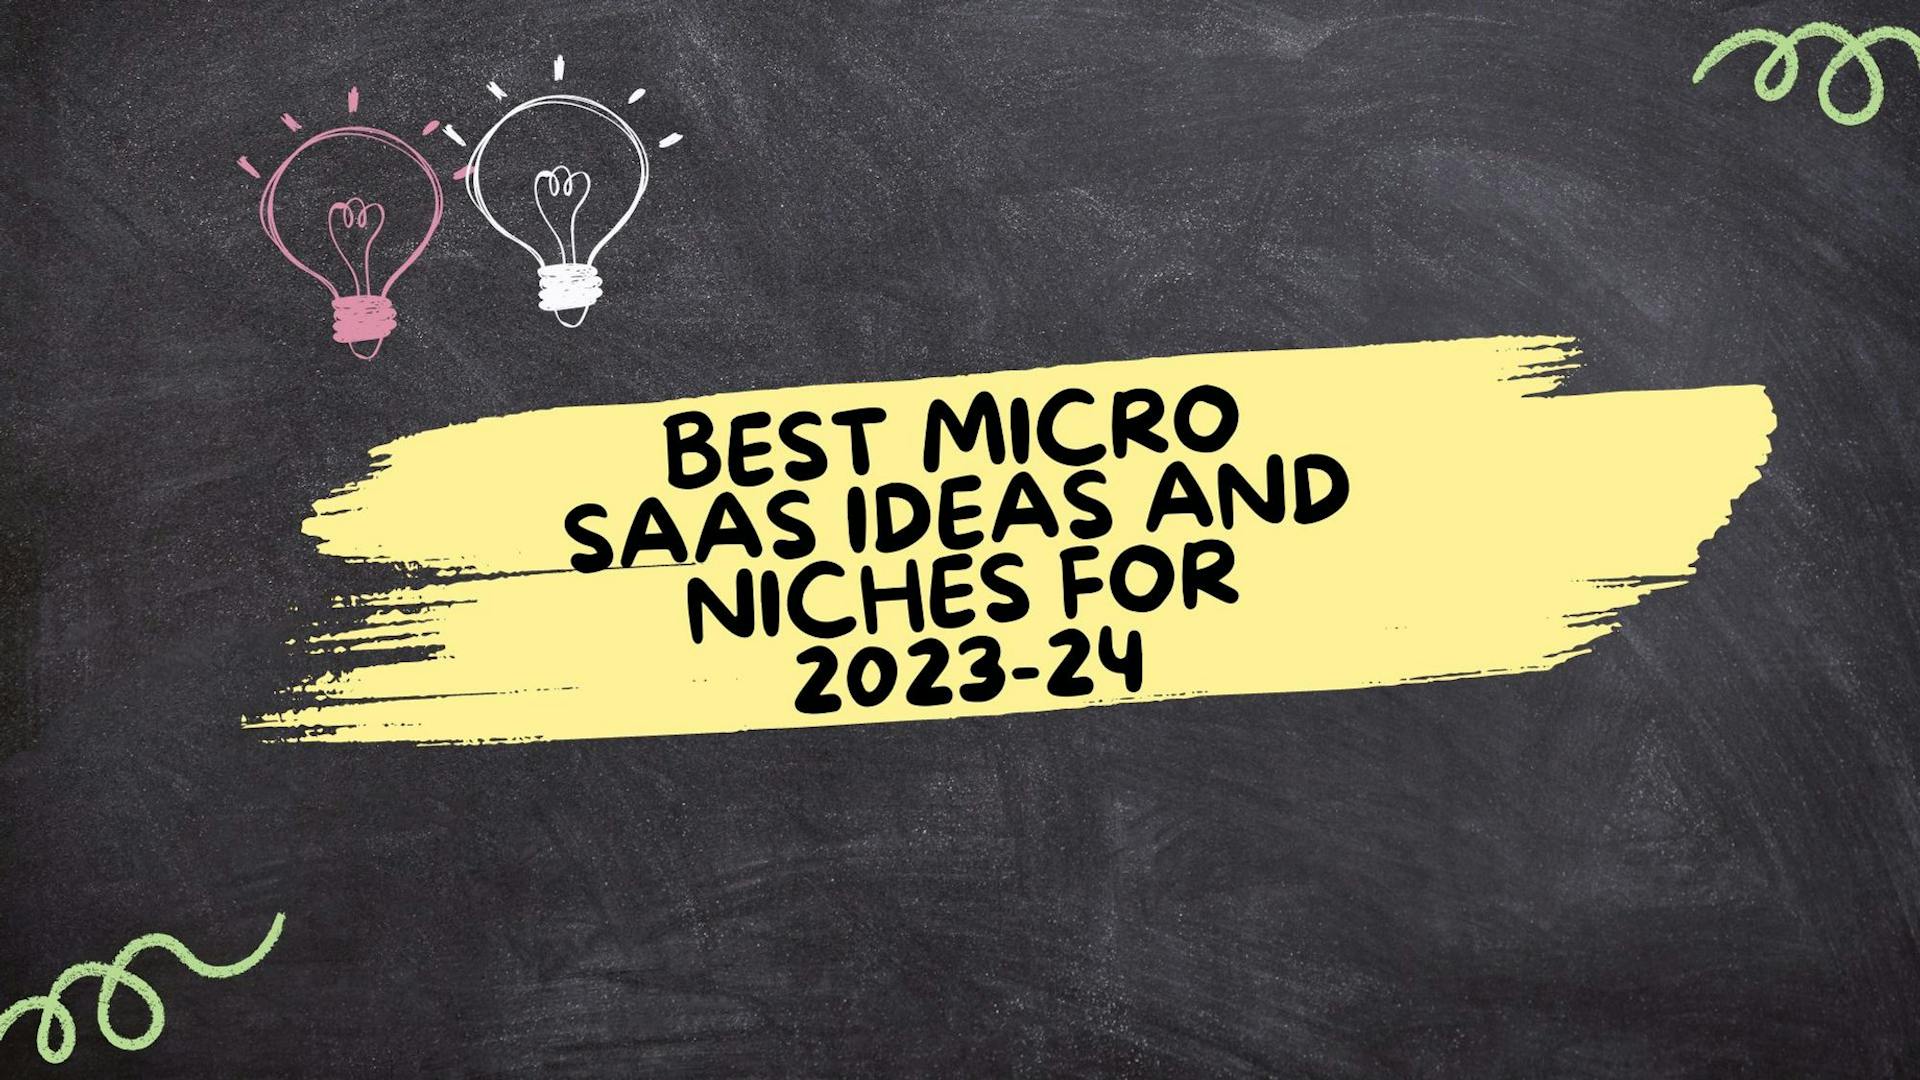 Cover Image for Best Micro SaaS Ideas and Niches for 2023-24